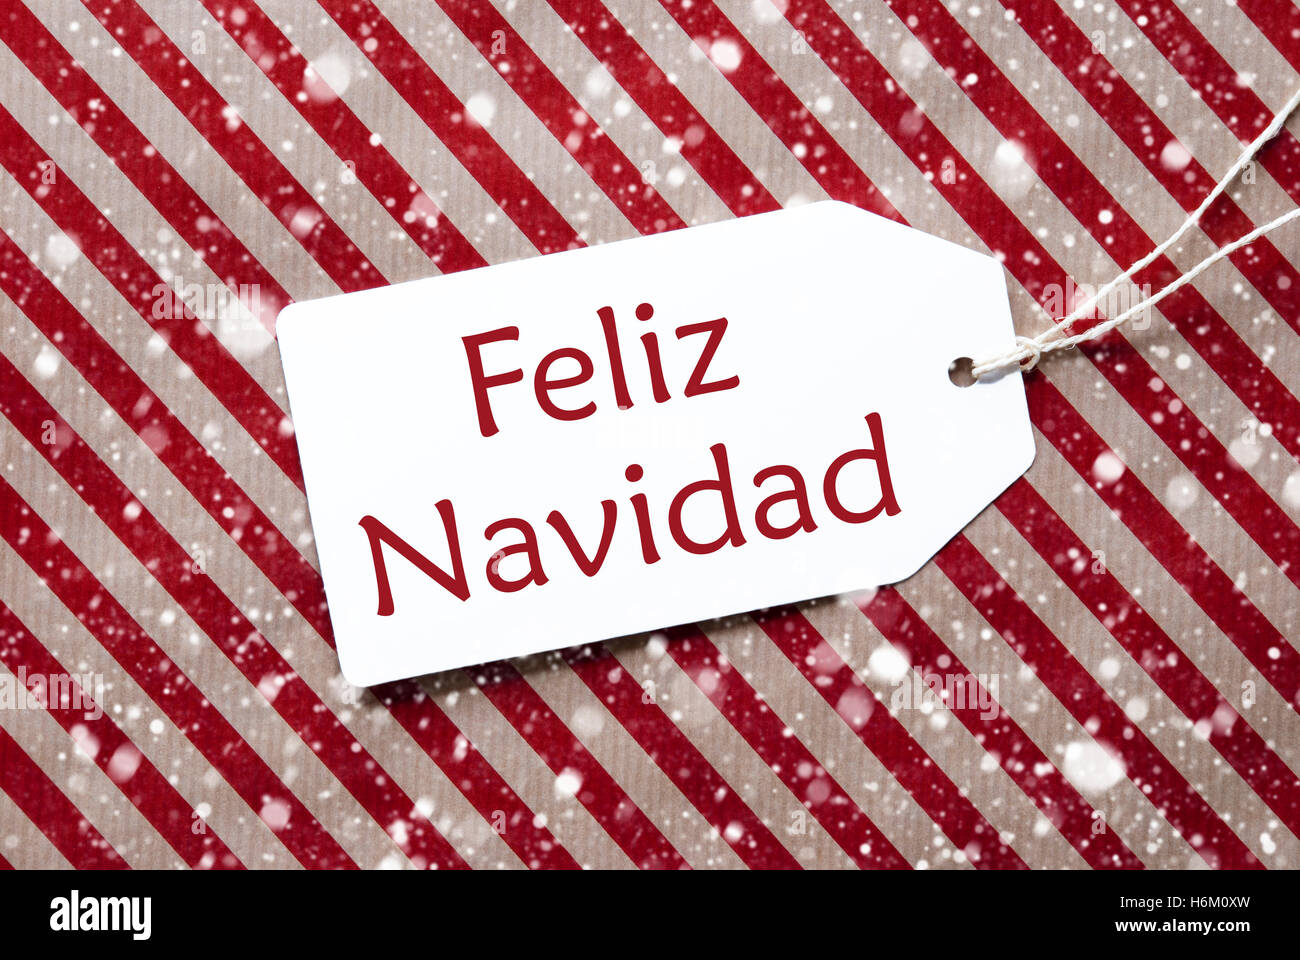 Label On Red Paper, Feliz Navidad Means Merry Christmas, Snowflakes Stock Photo